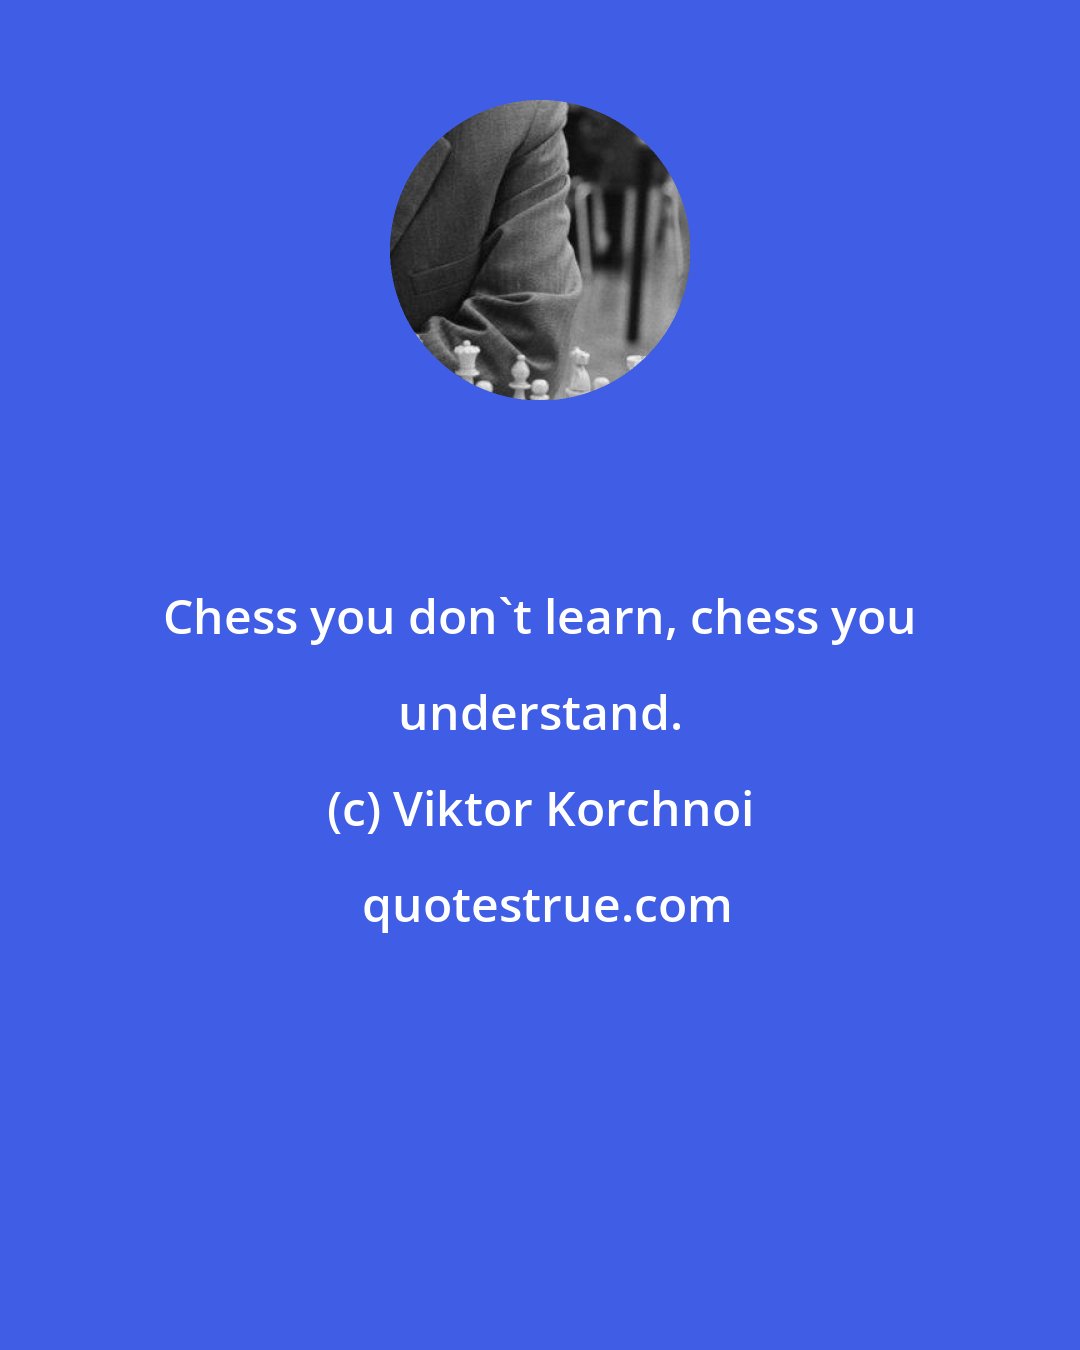 Viktor Korchnoi: Chess you don't learn, chess you understand.